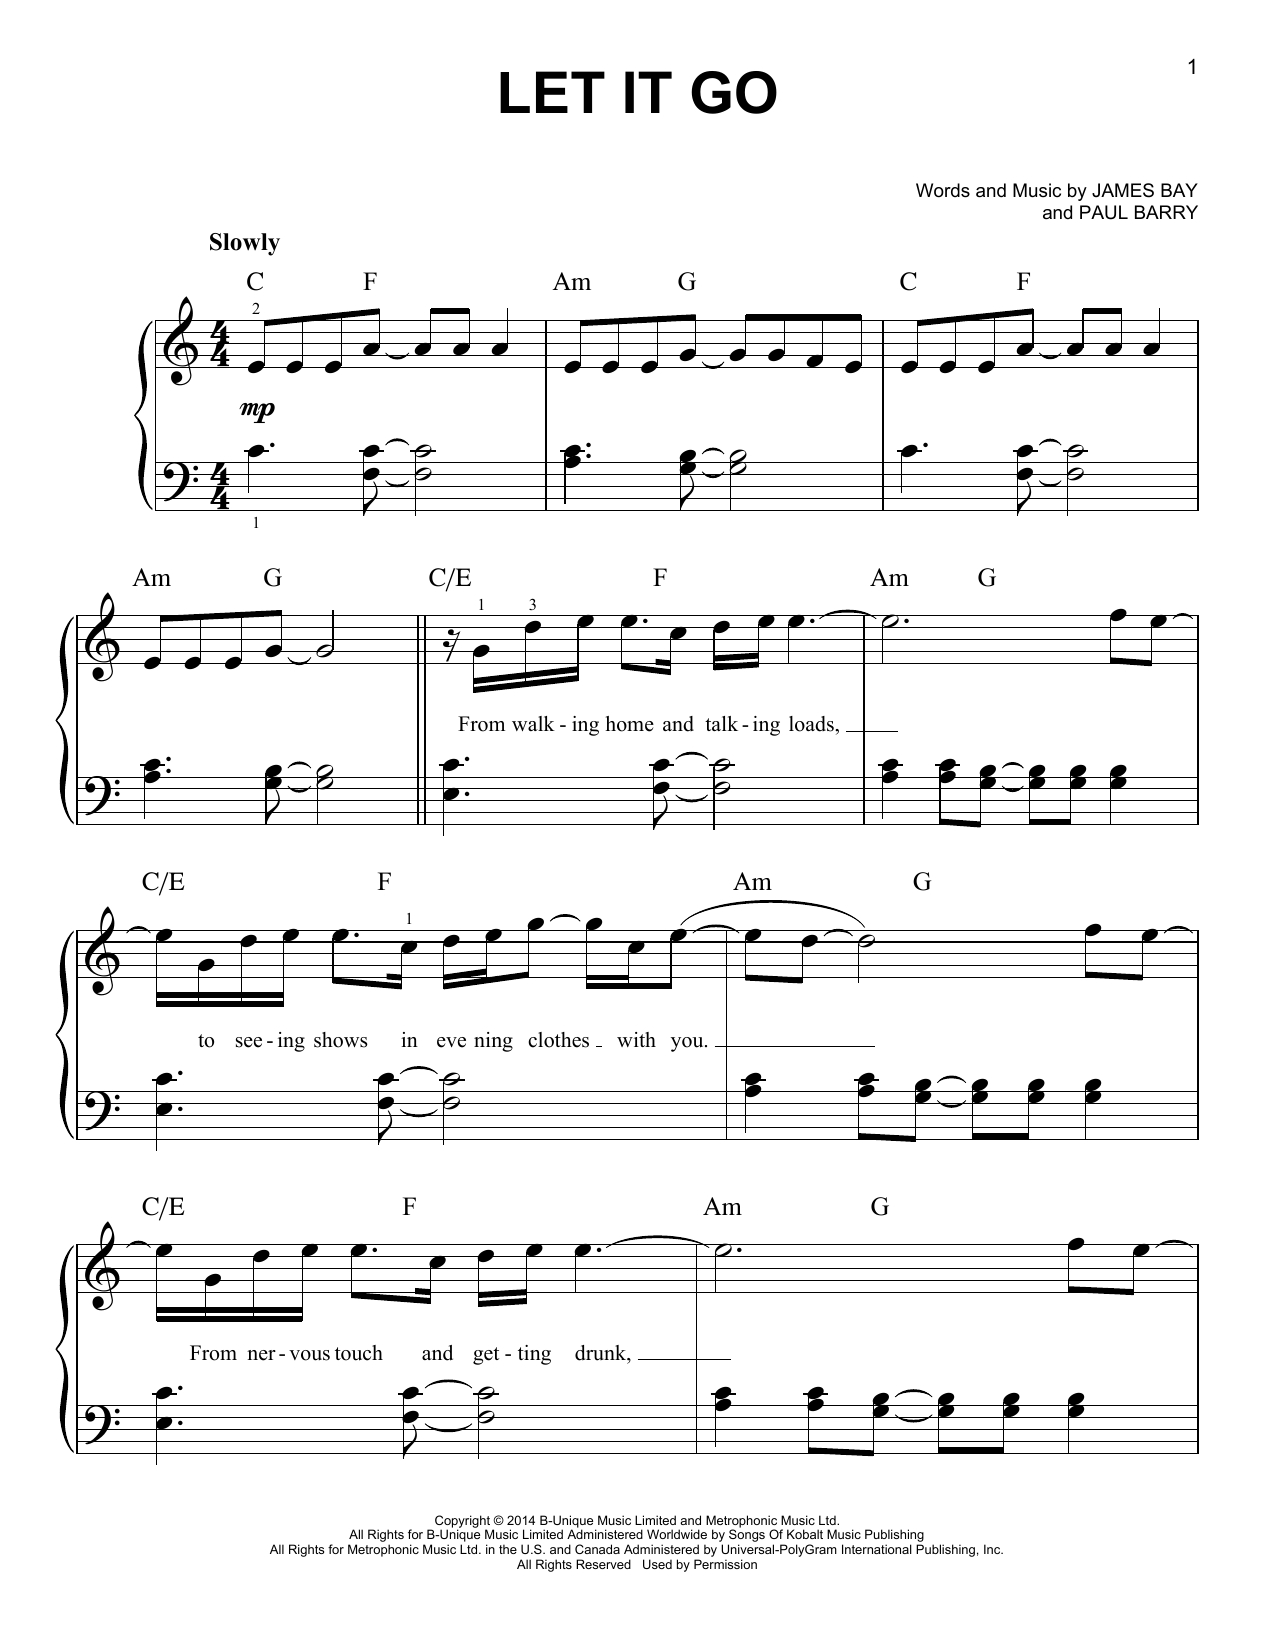 James Bay Let It Go Sheet Music Notes, Chords In 2019 | Piano - Let It Go Violin Sheet Music Free Printable